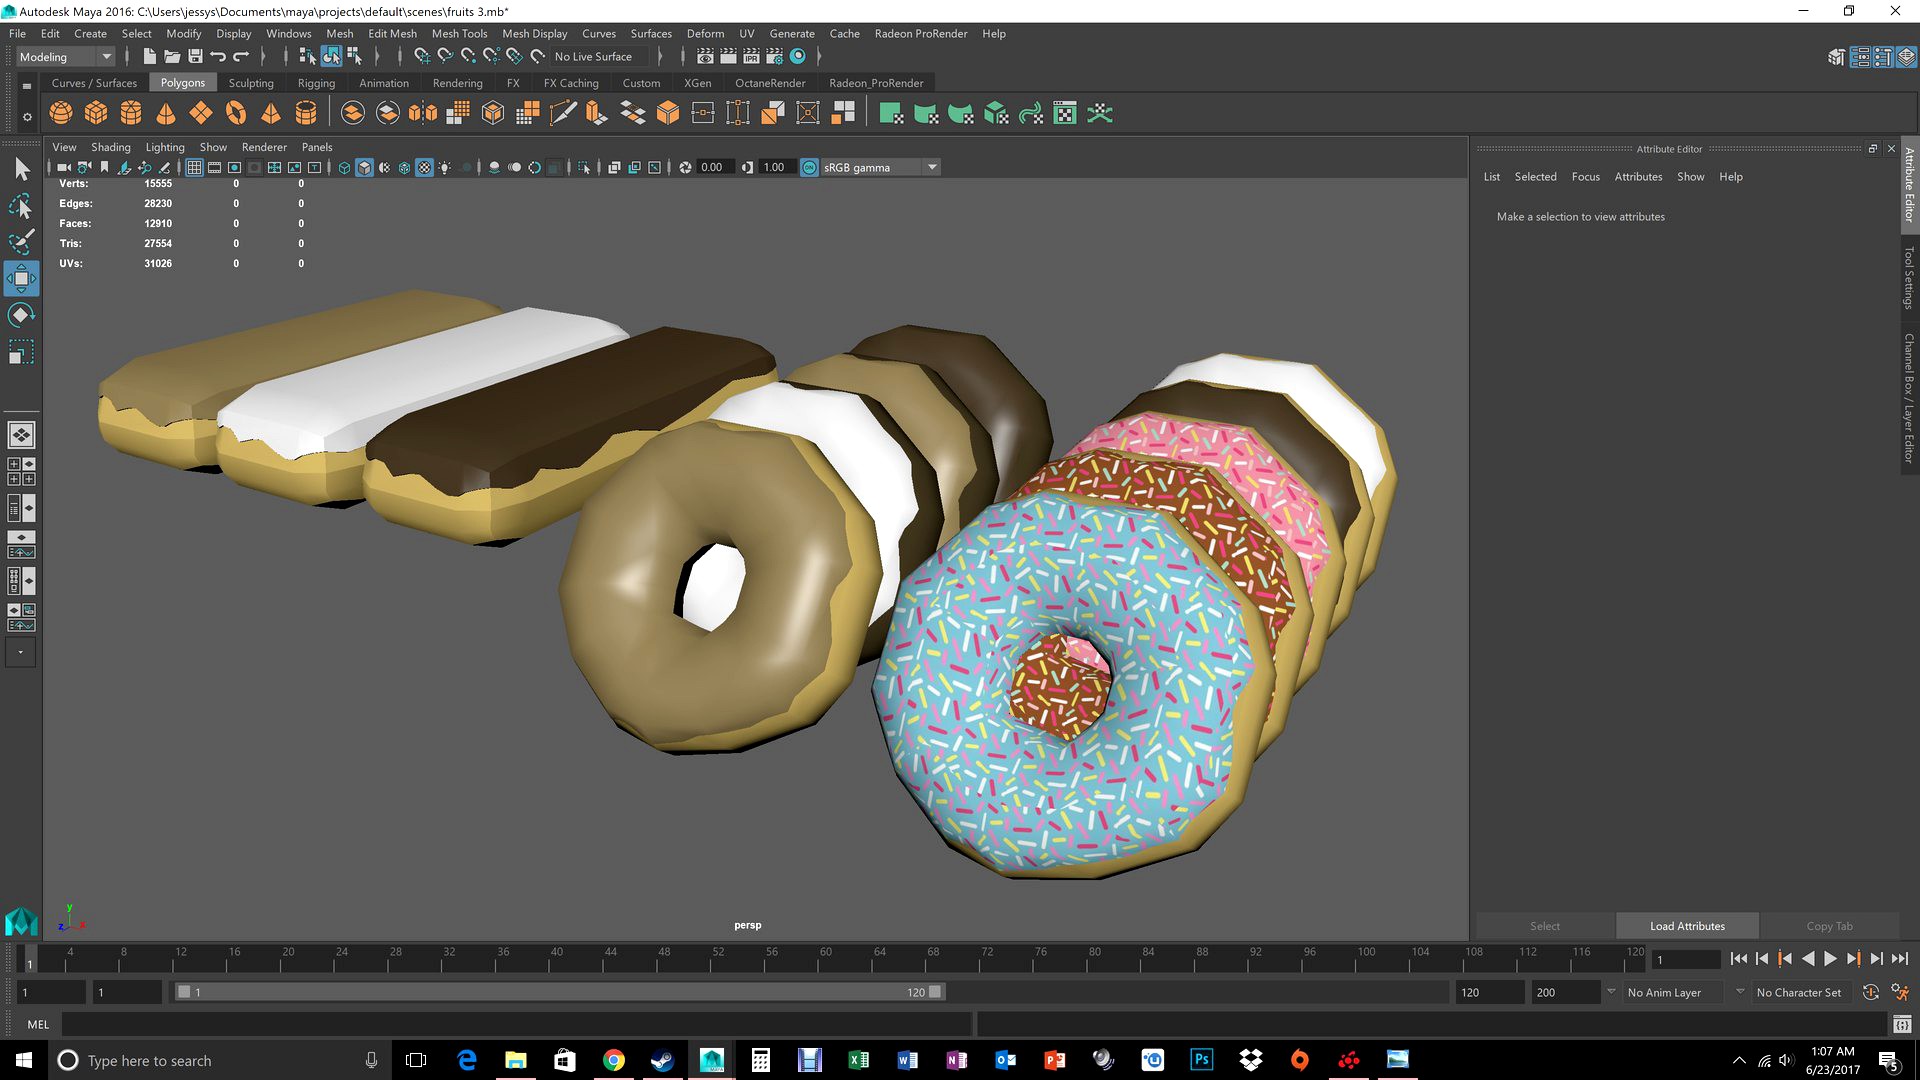 donut with display included